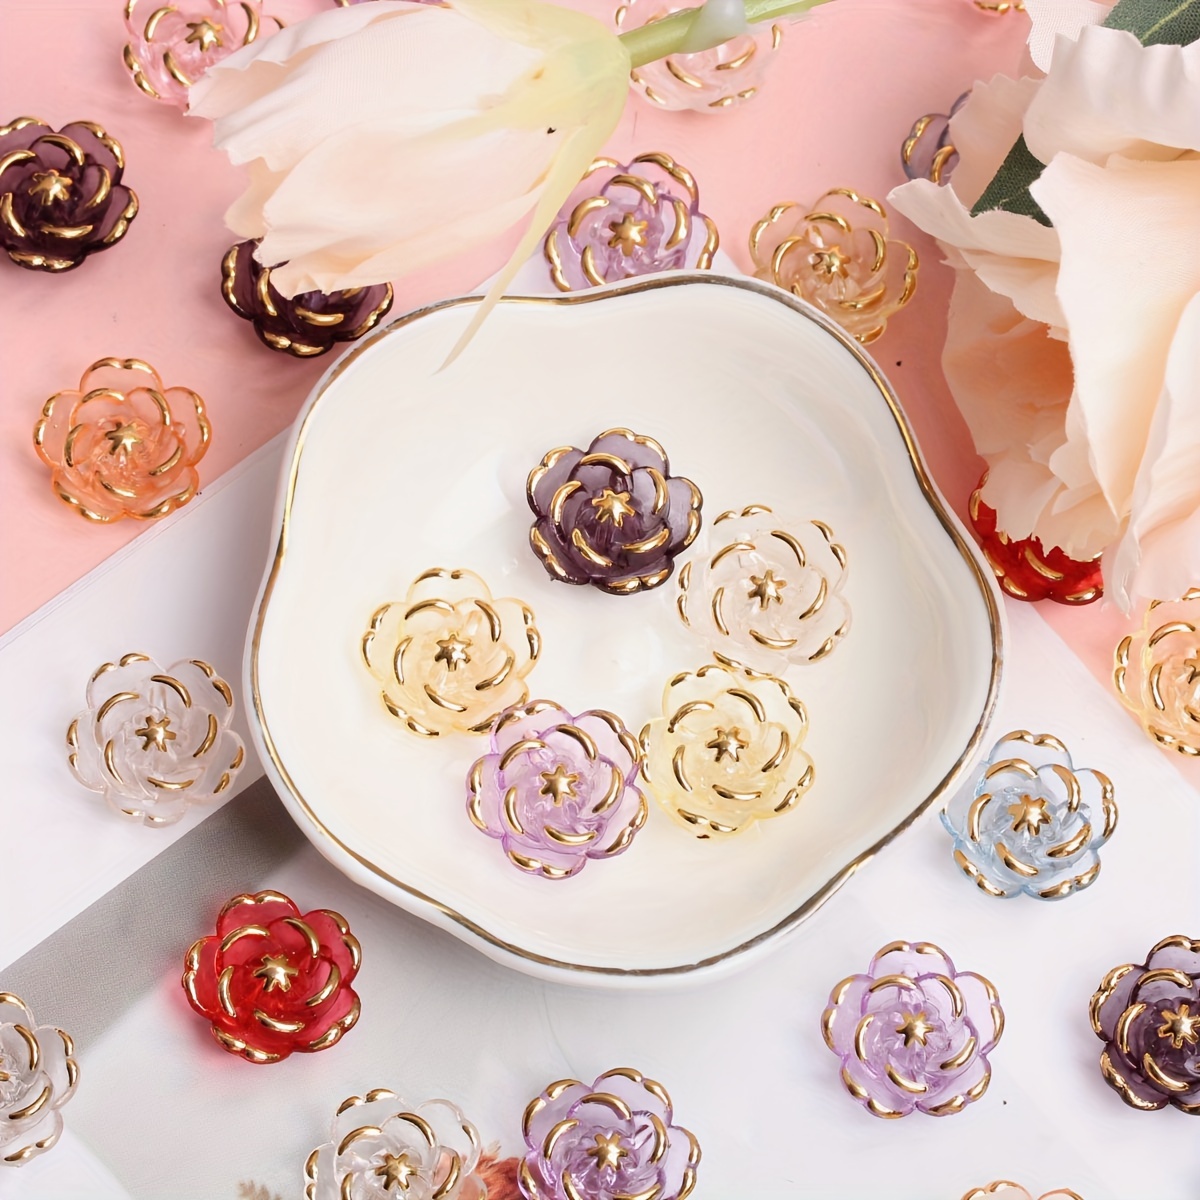 

40pcs/lot 18.6mm Acrylic Transparent Rose Flower Button Golden Edge Handmade Crafts Sewing Accessories Jewelry Making Decorations